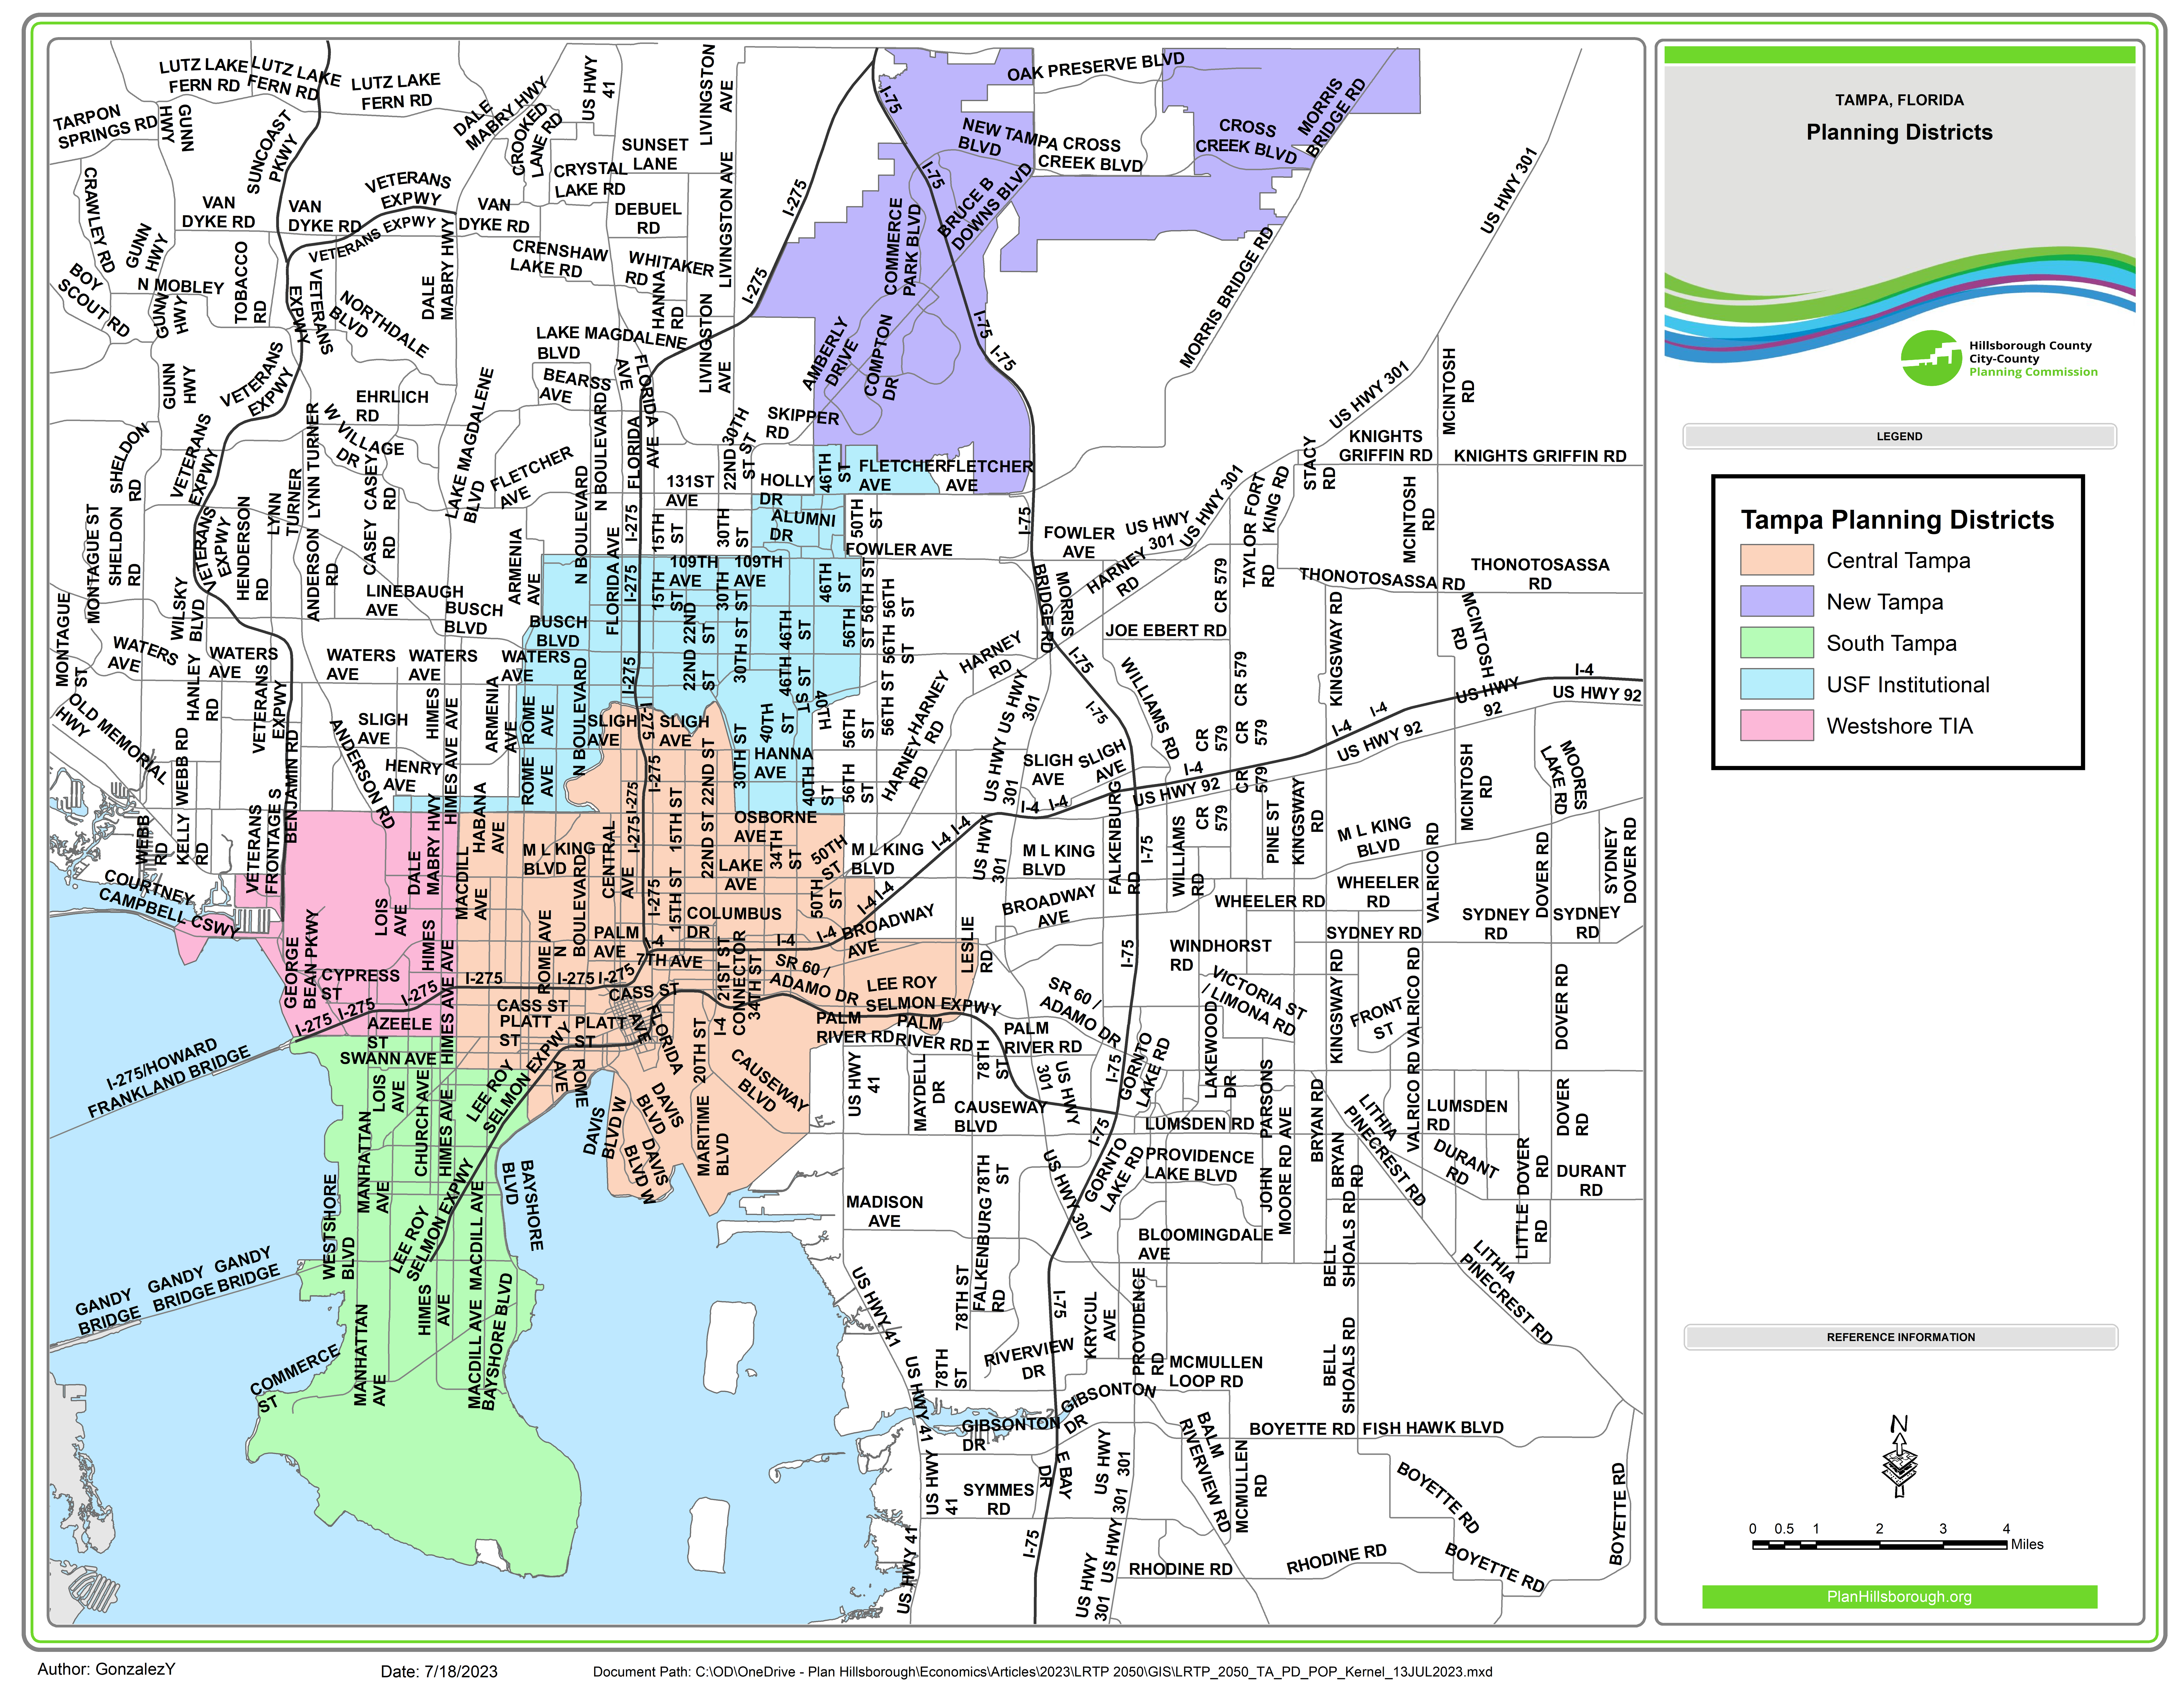 This map shows the five planning districts within the City of Tampa: Central Tampa, New Tampa, South Tampa, USF Institutional, and Westshore.